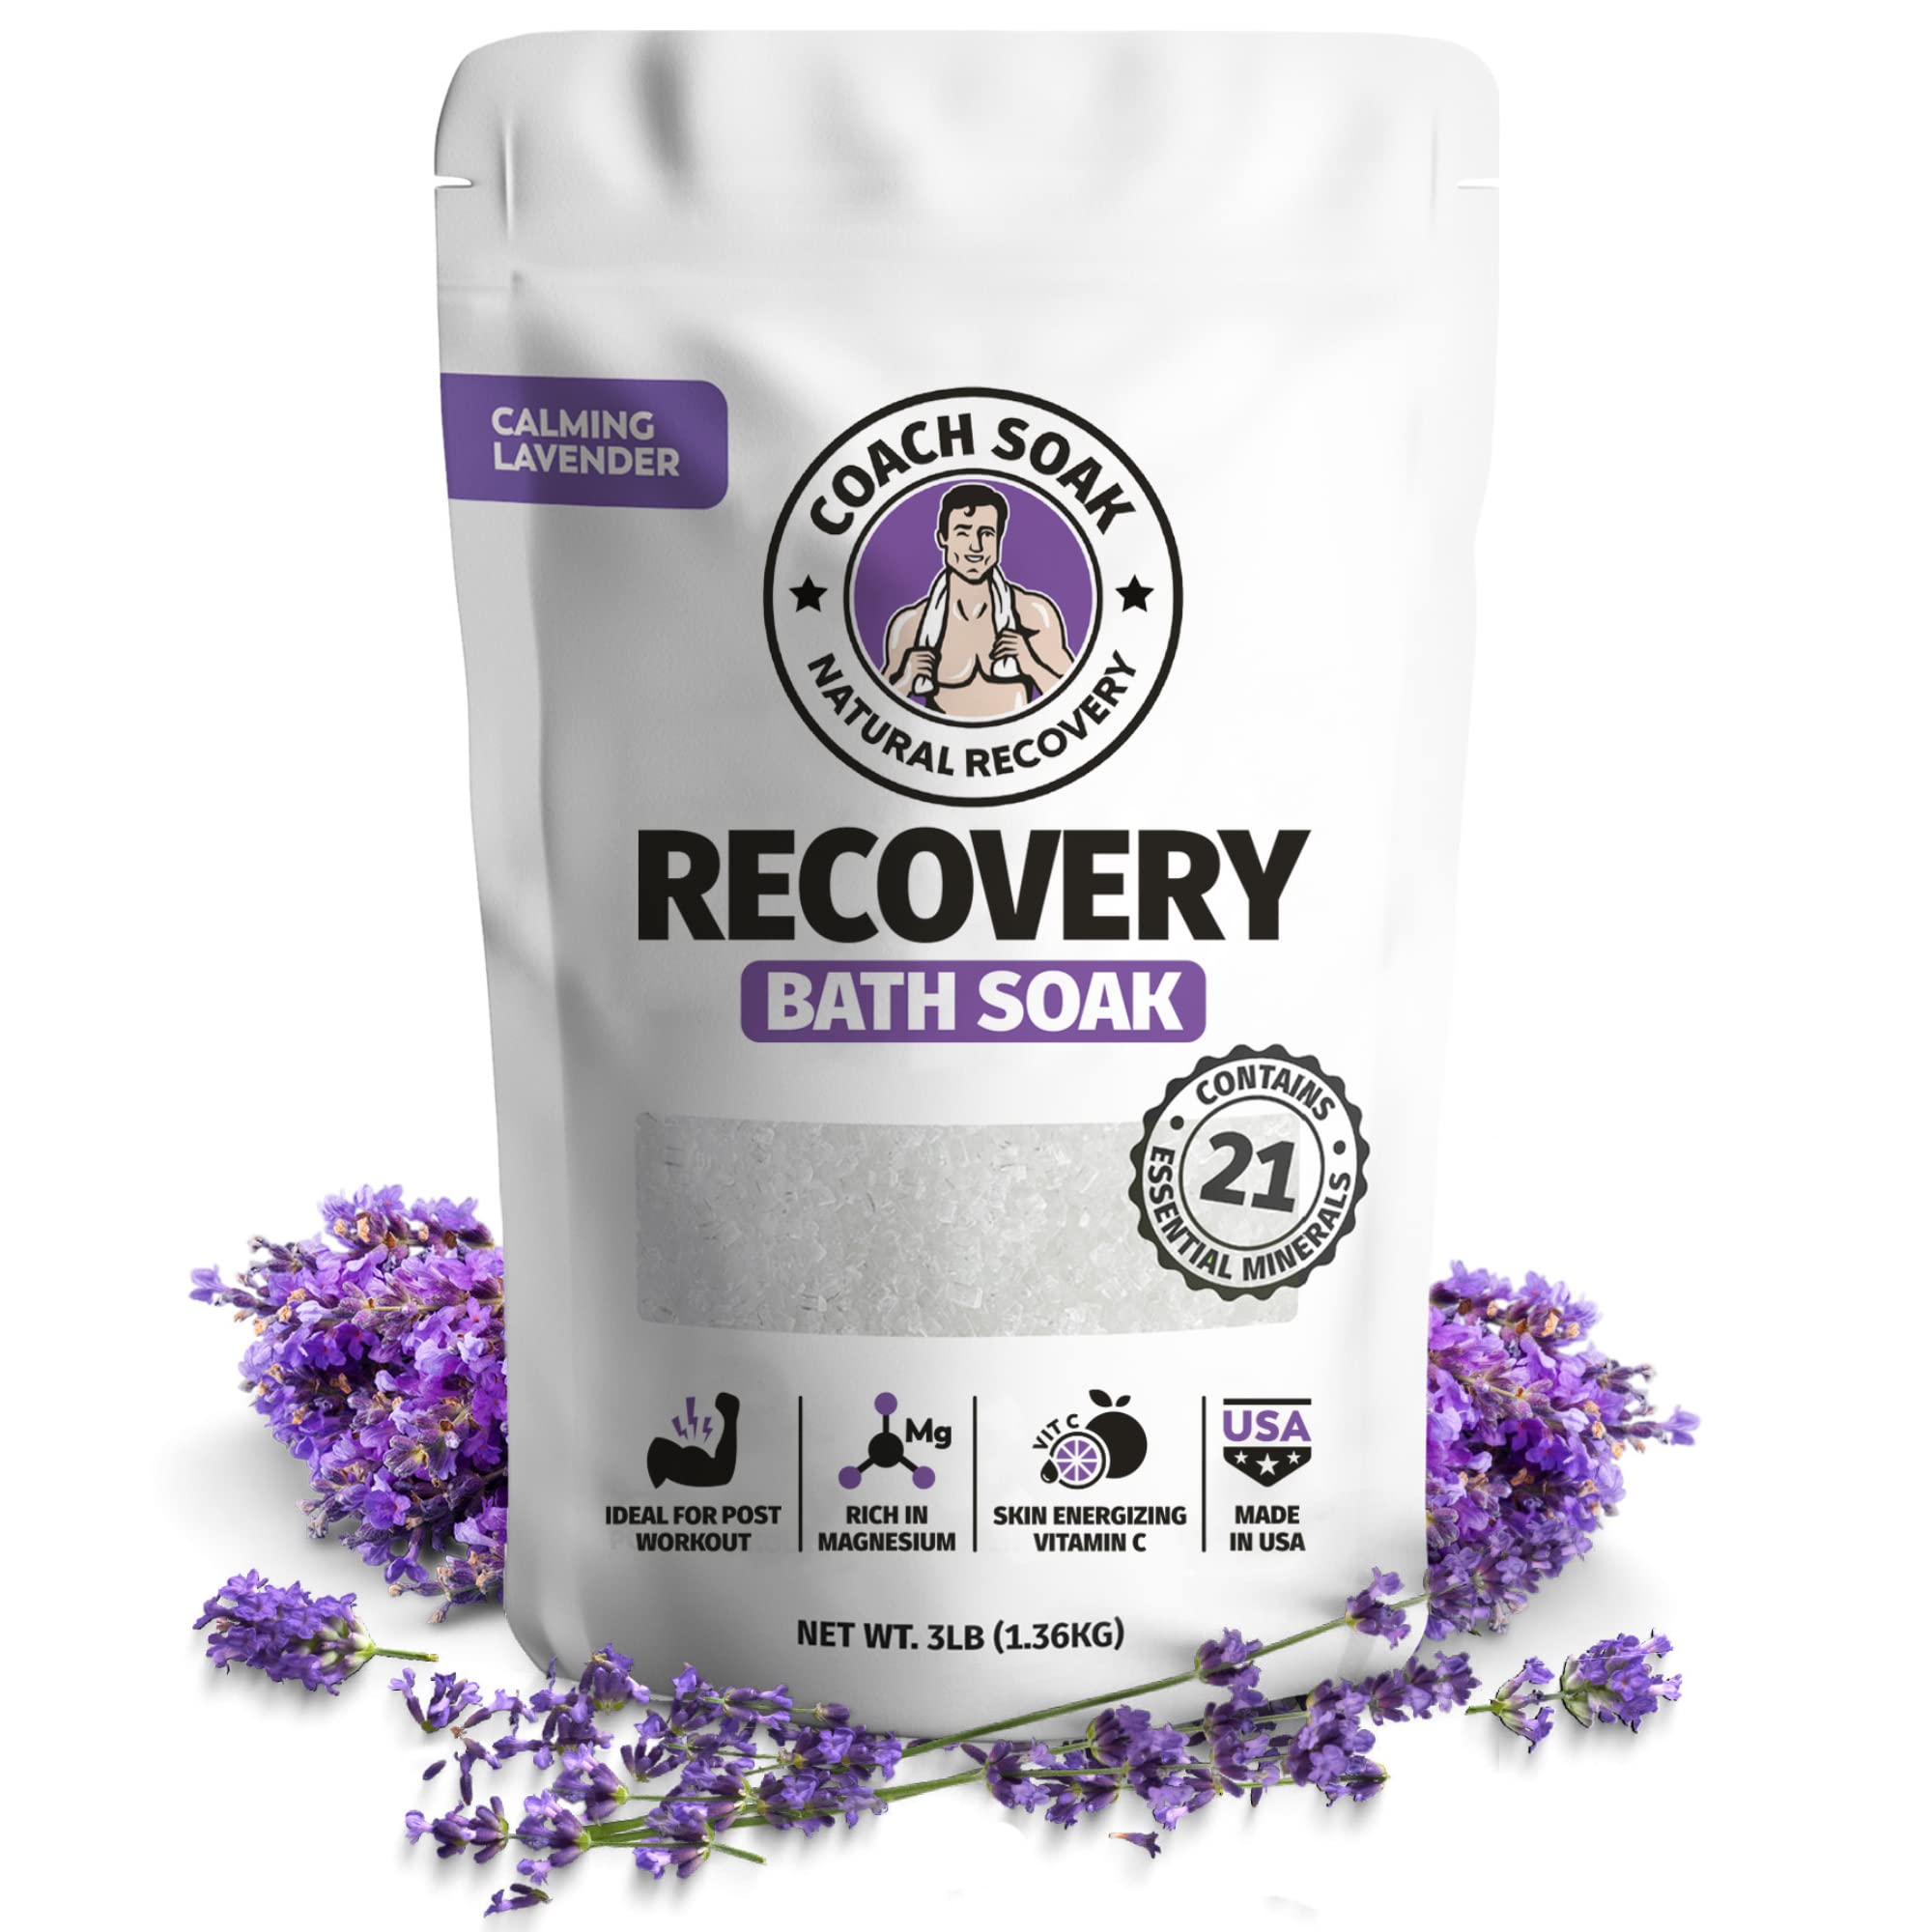 Coach Soak: Recovery Bath Soak - Absorbs Faster Than Epsom Salts for Soaking for Pain – Rejuvenating Post Workout Magnesium Flakes -21 Minerals, Essential Oils & Dead Sea Bath Salts (Calming Lavender)